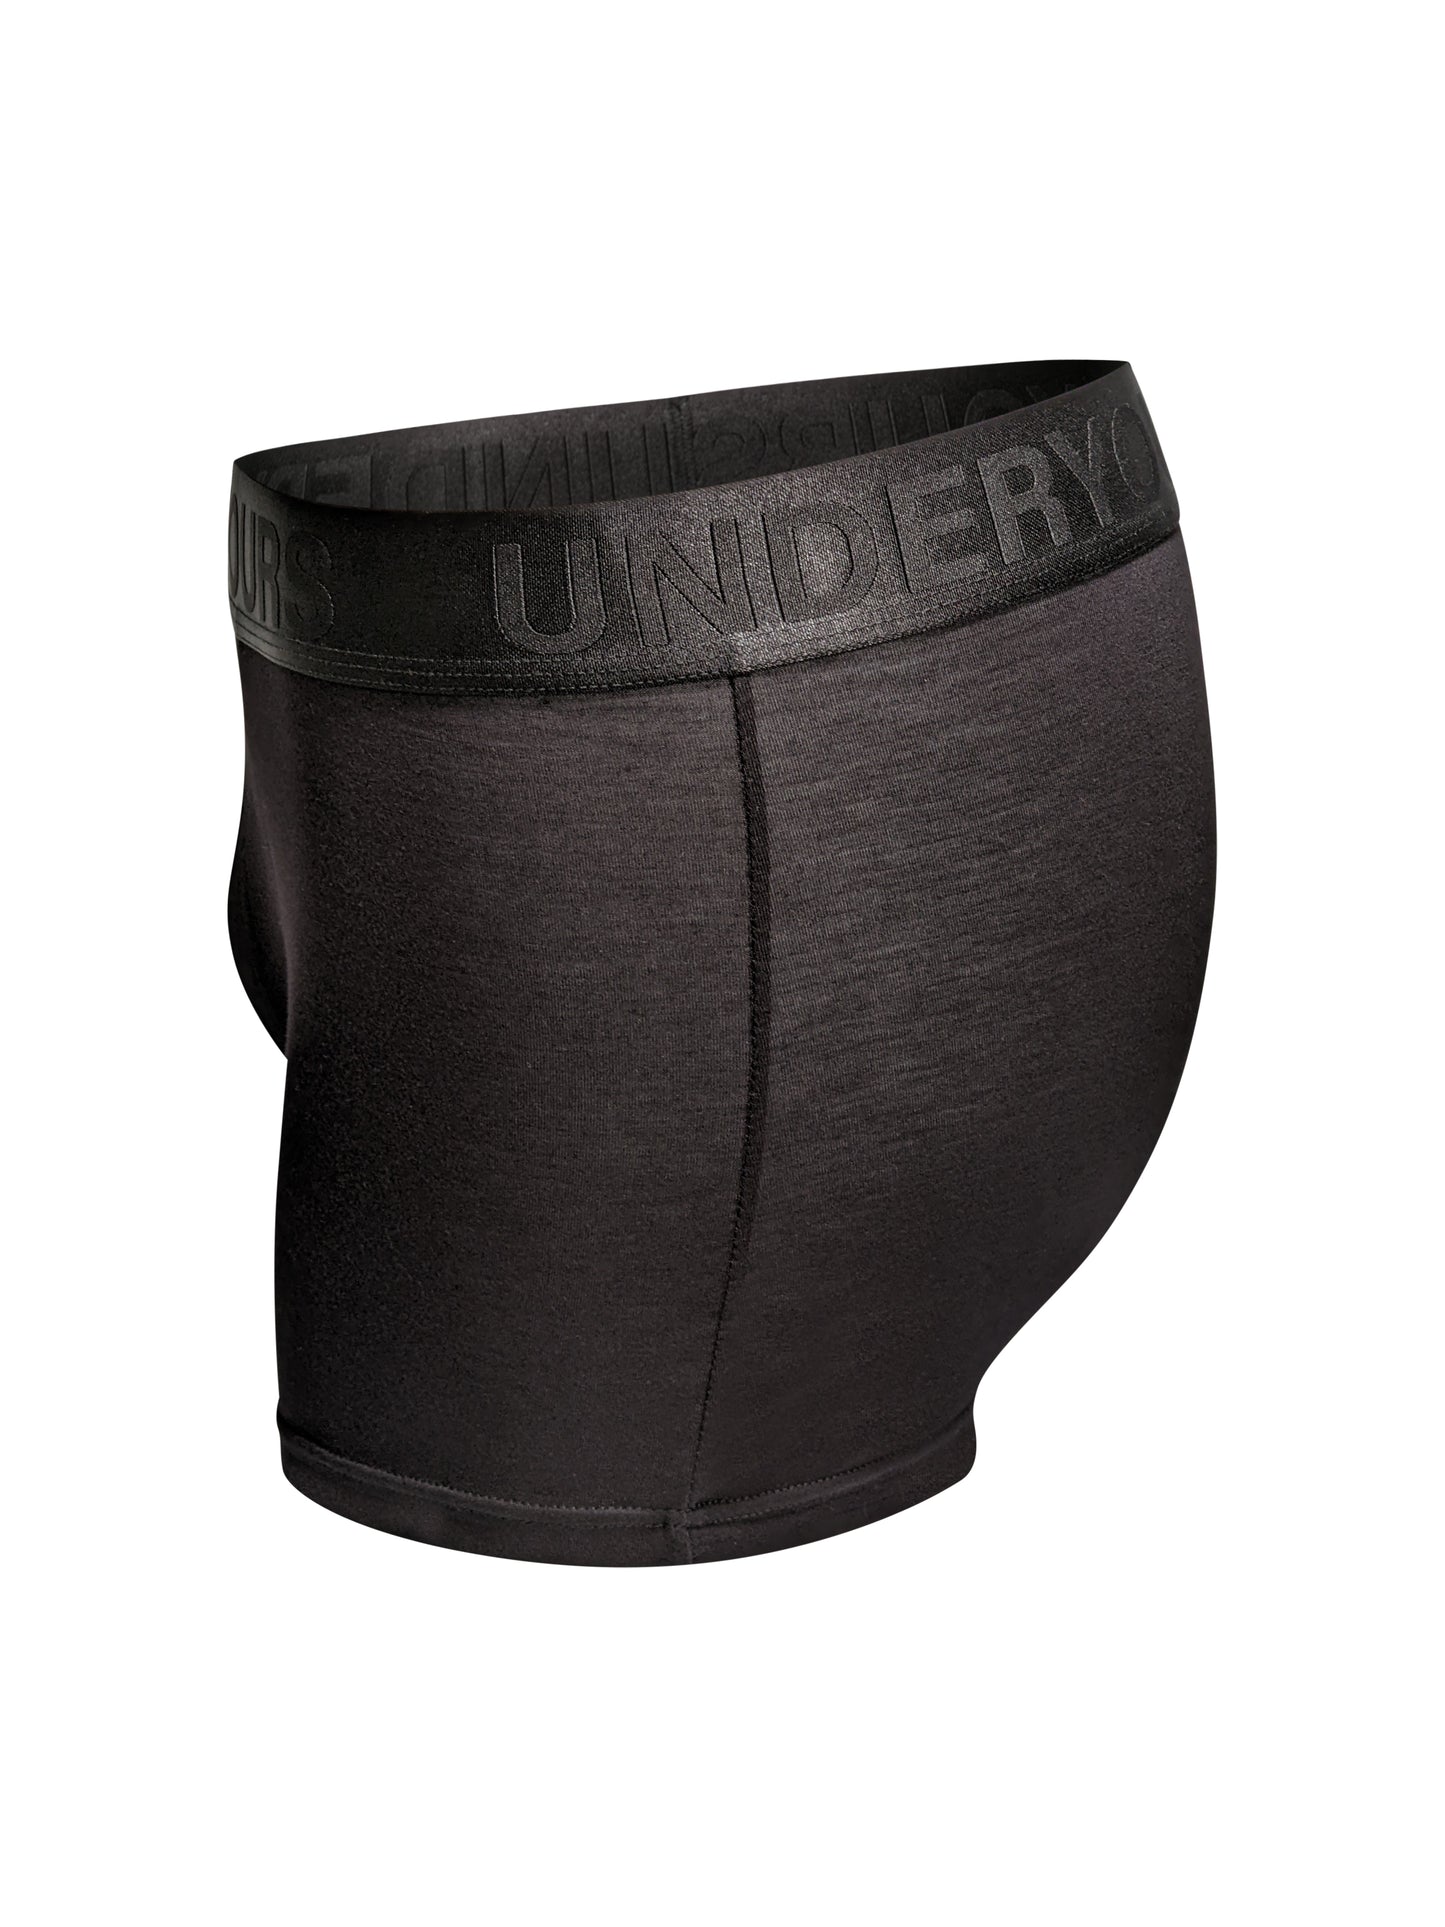 UnderYours Comfort Bamboo Boxer Shorts 3 Pack